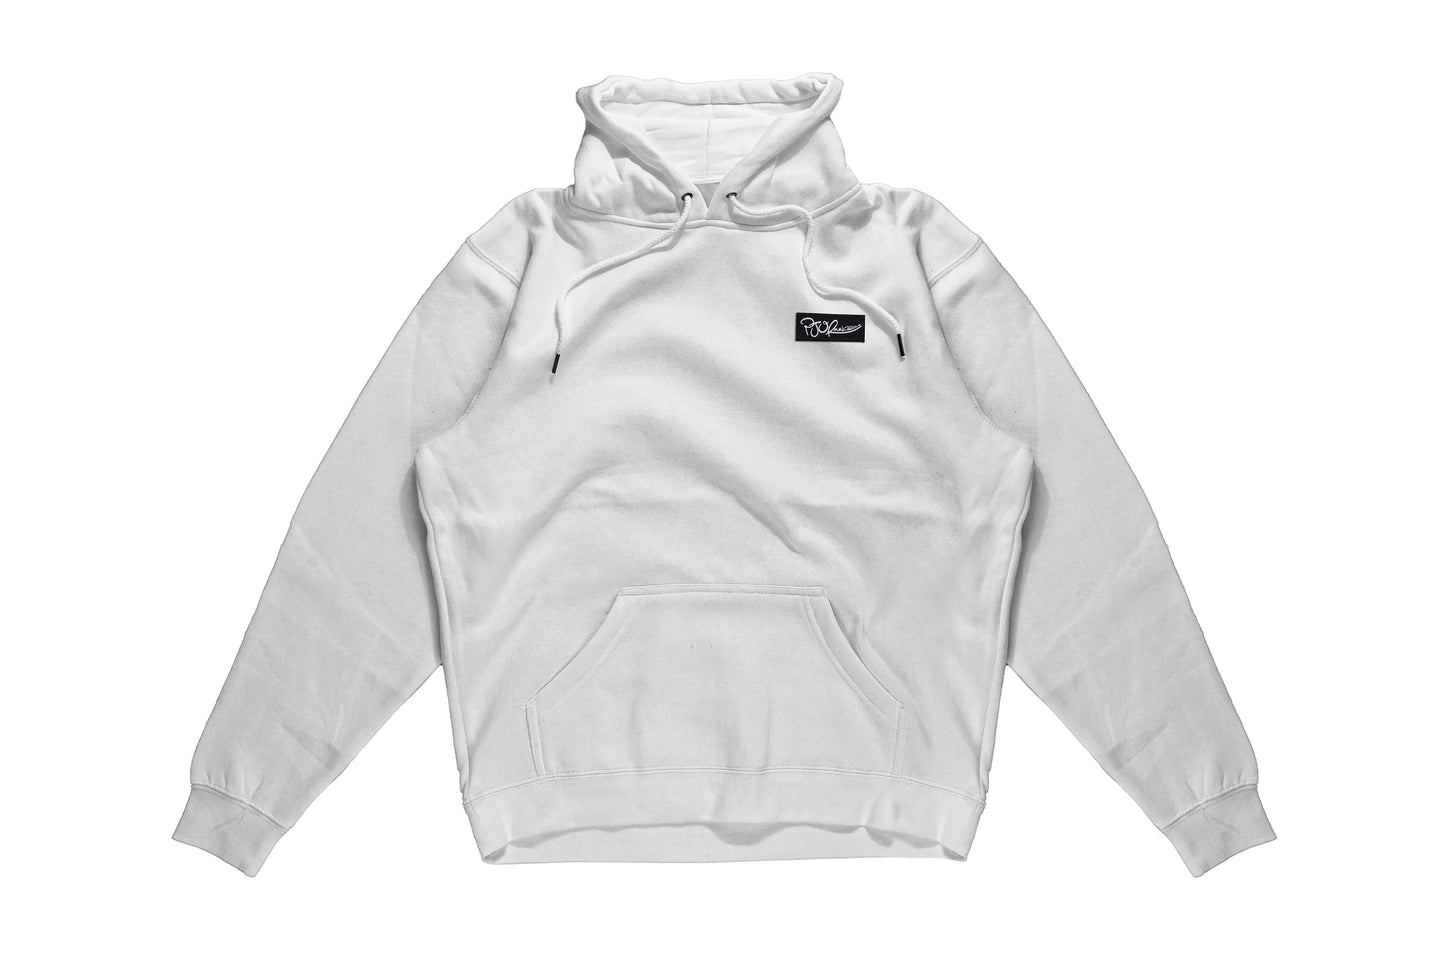 The Illest Patch on White Hoodie